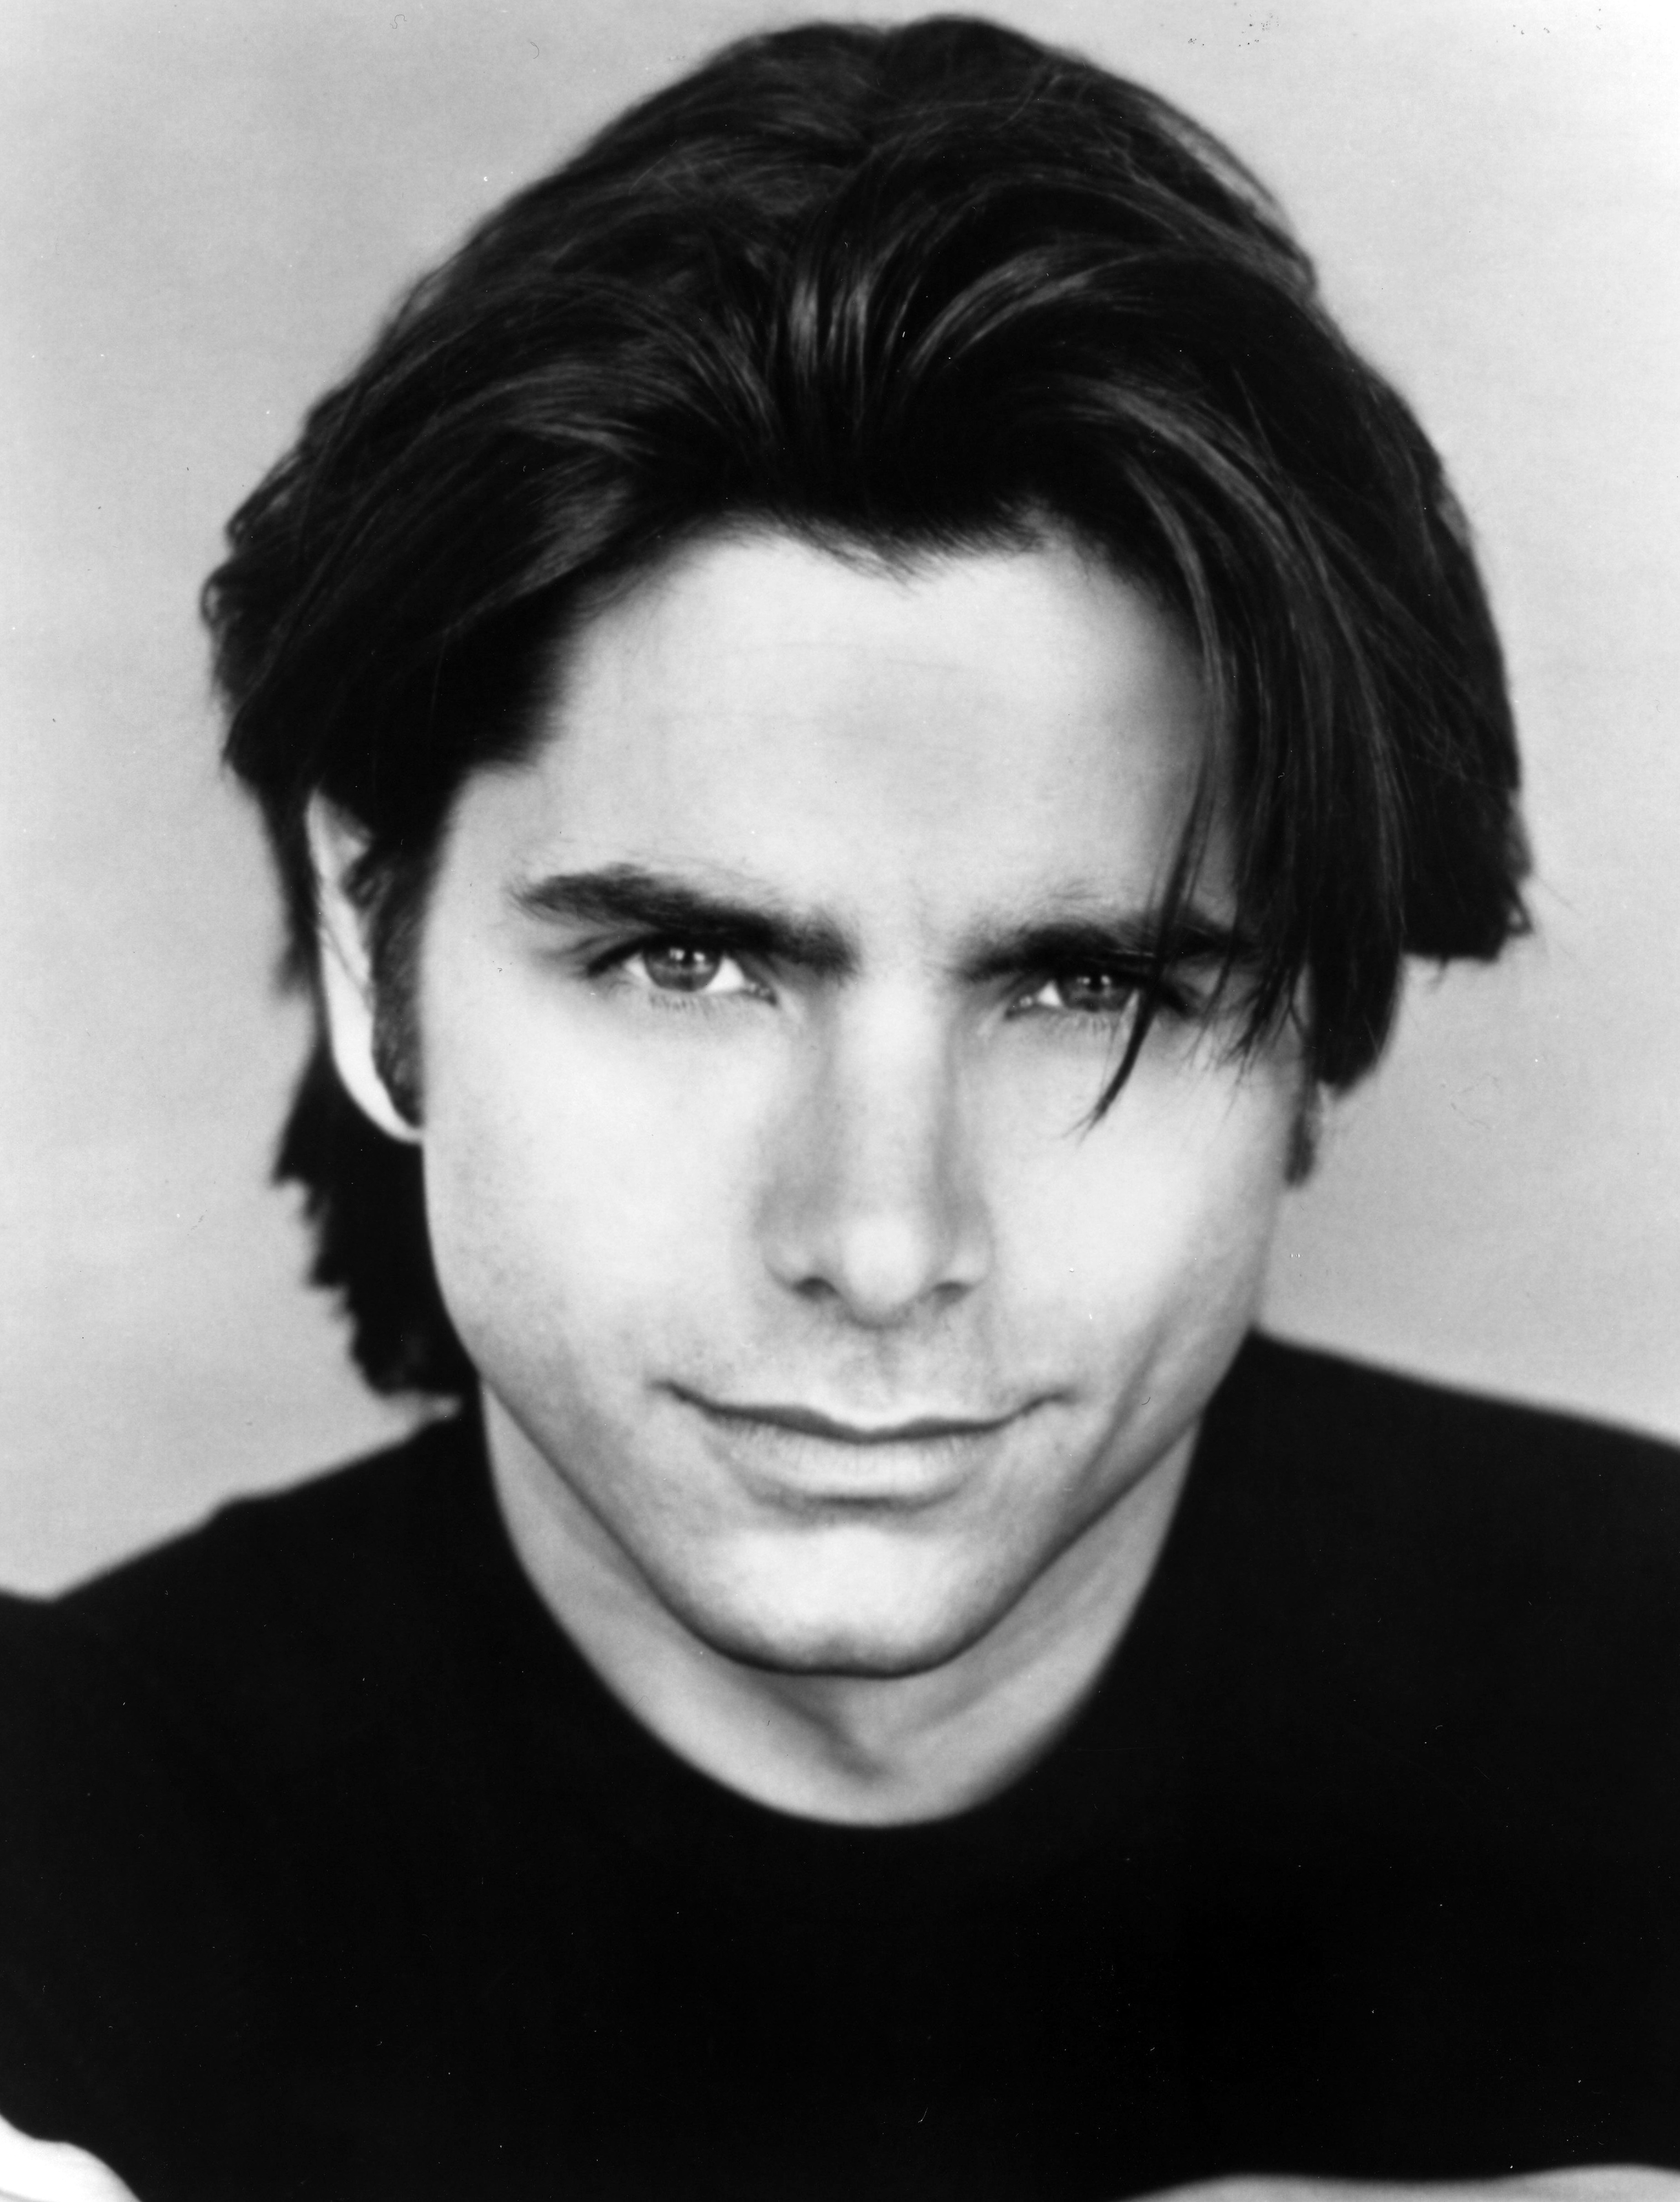 A black and white headshot of musician John Stamos on September 15, 1993 | Source: Getty Images